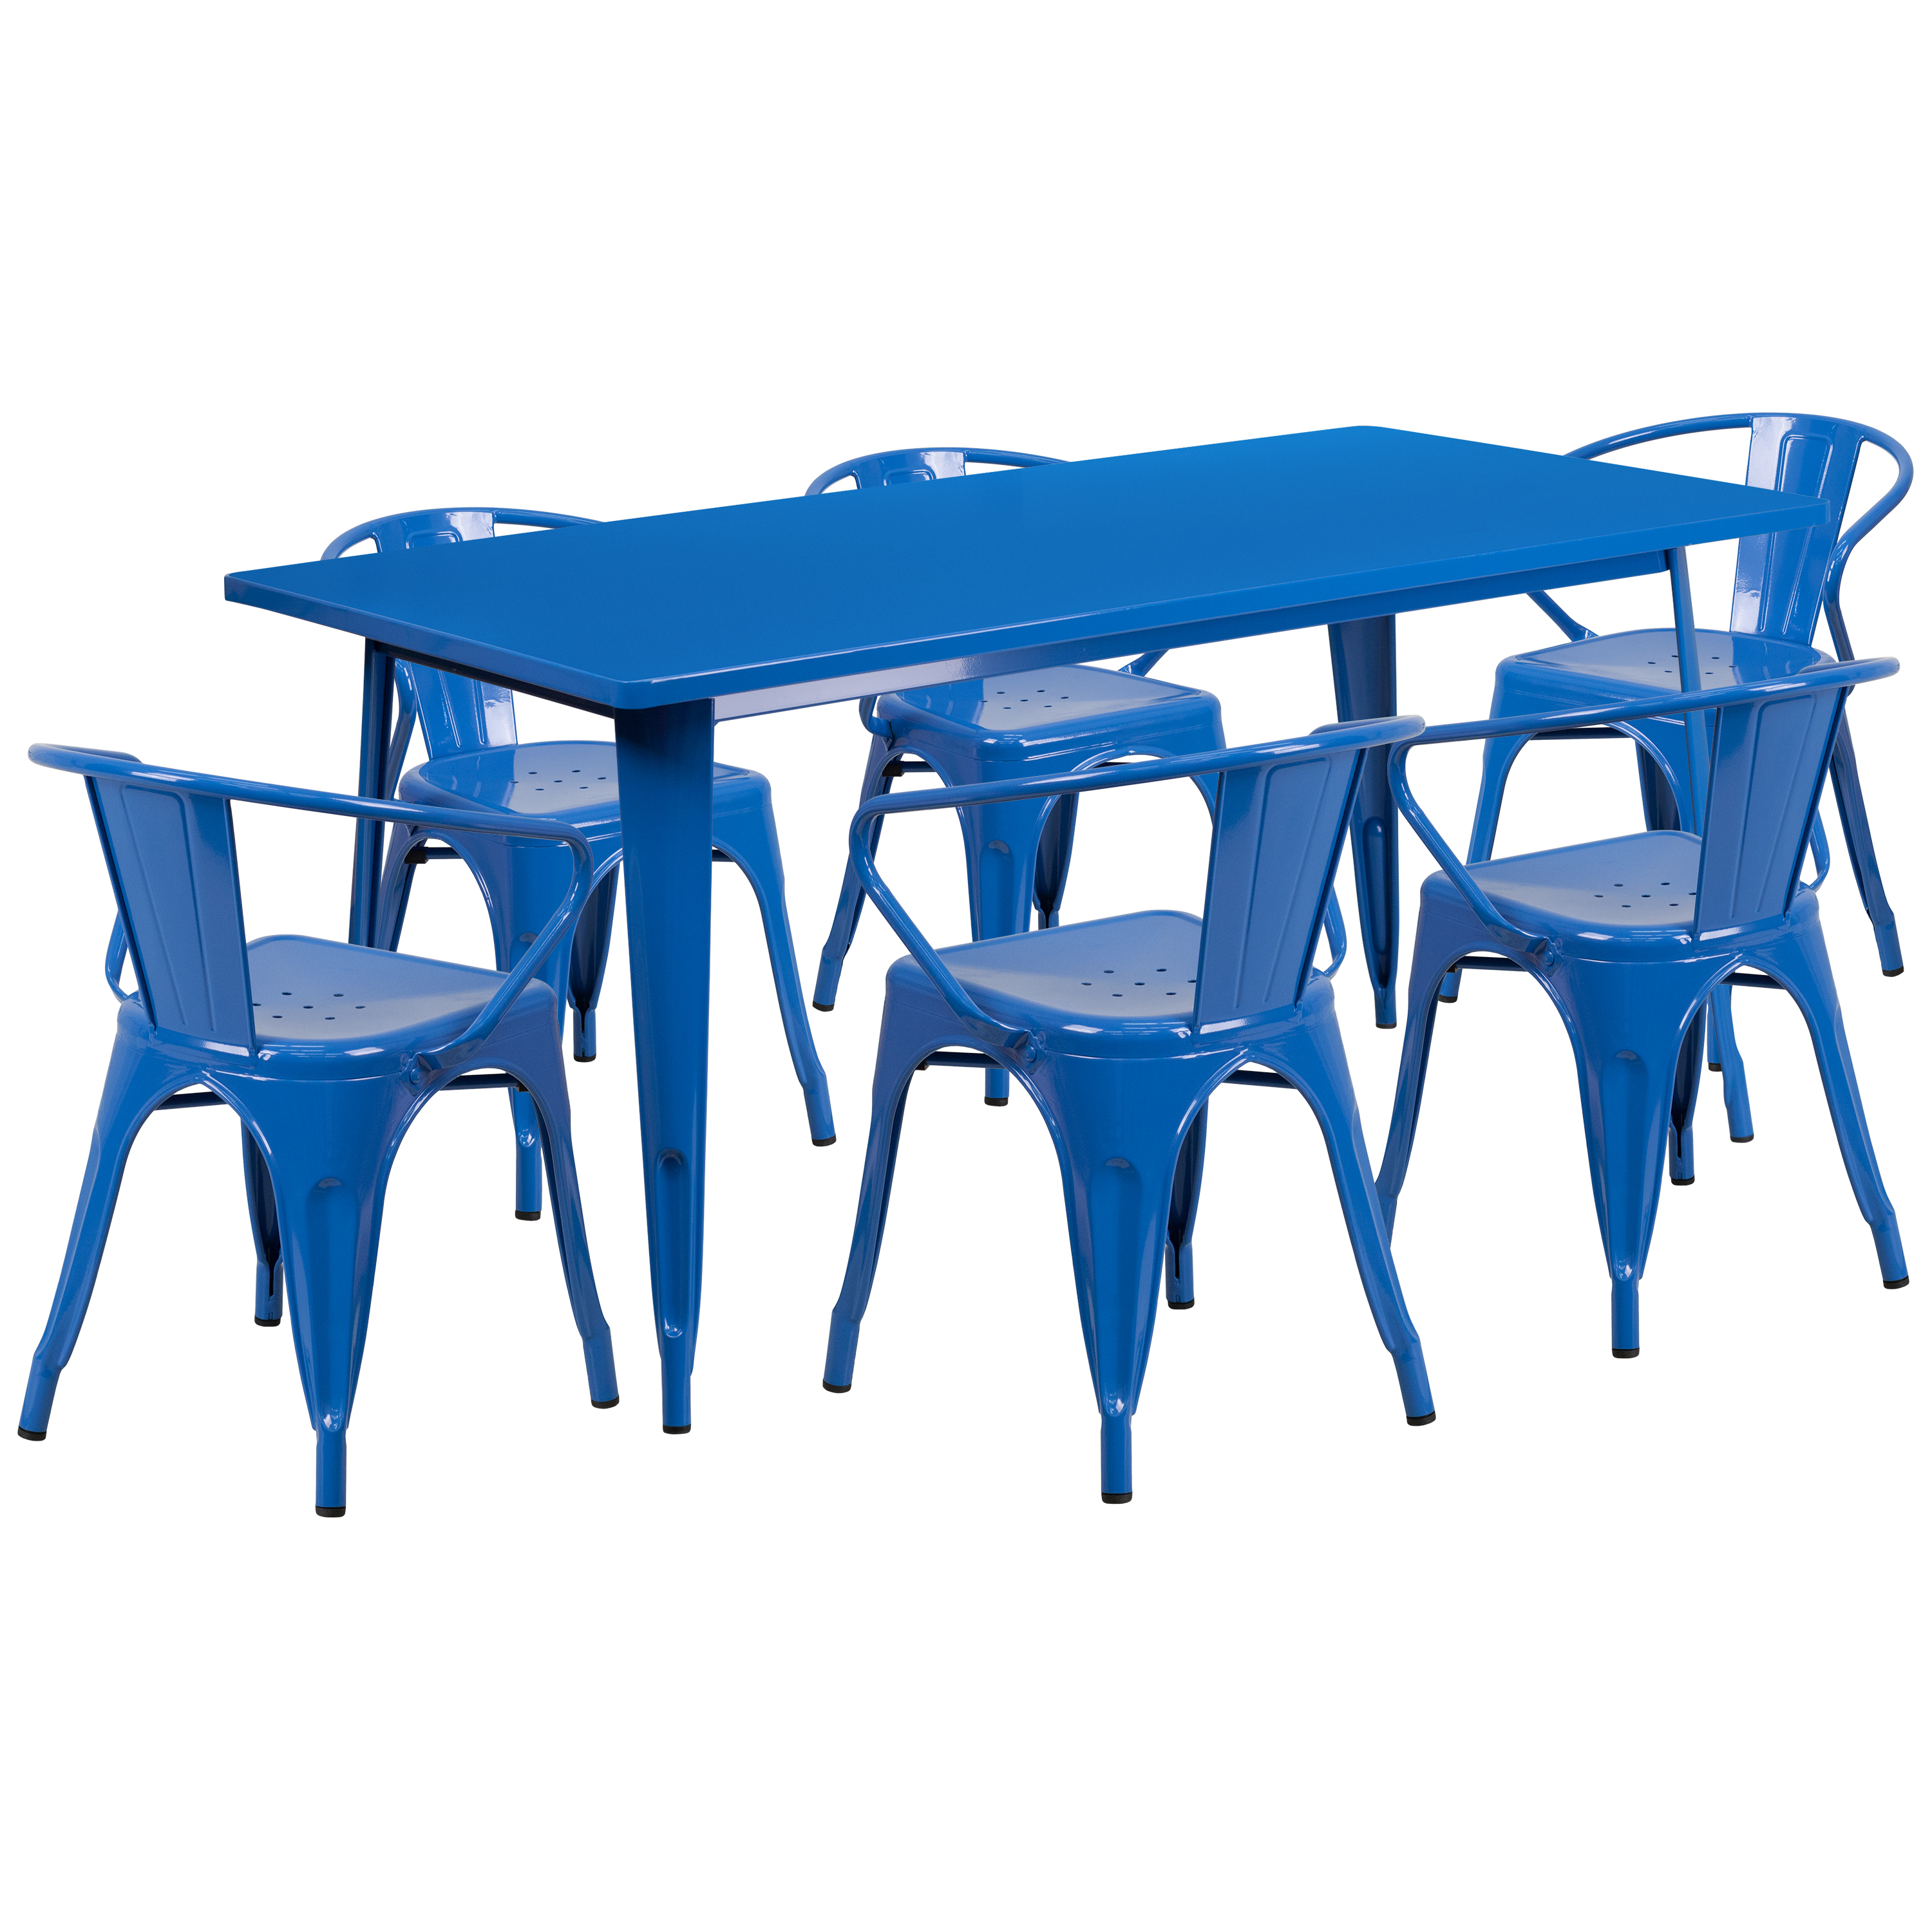 Emma + Oliver Commercial Grade Rectangular Blue Metal Indoor-Outdoor Table Set-6 Arm Chairs - image 2 of 5